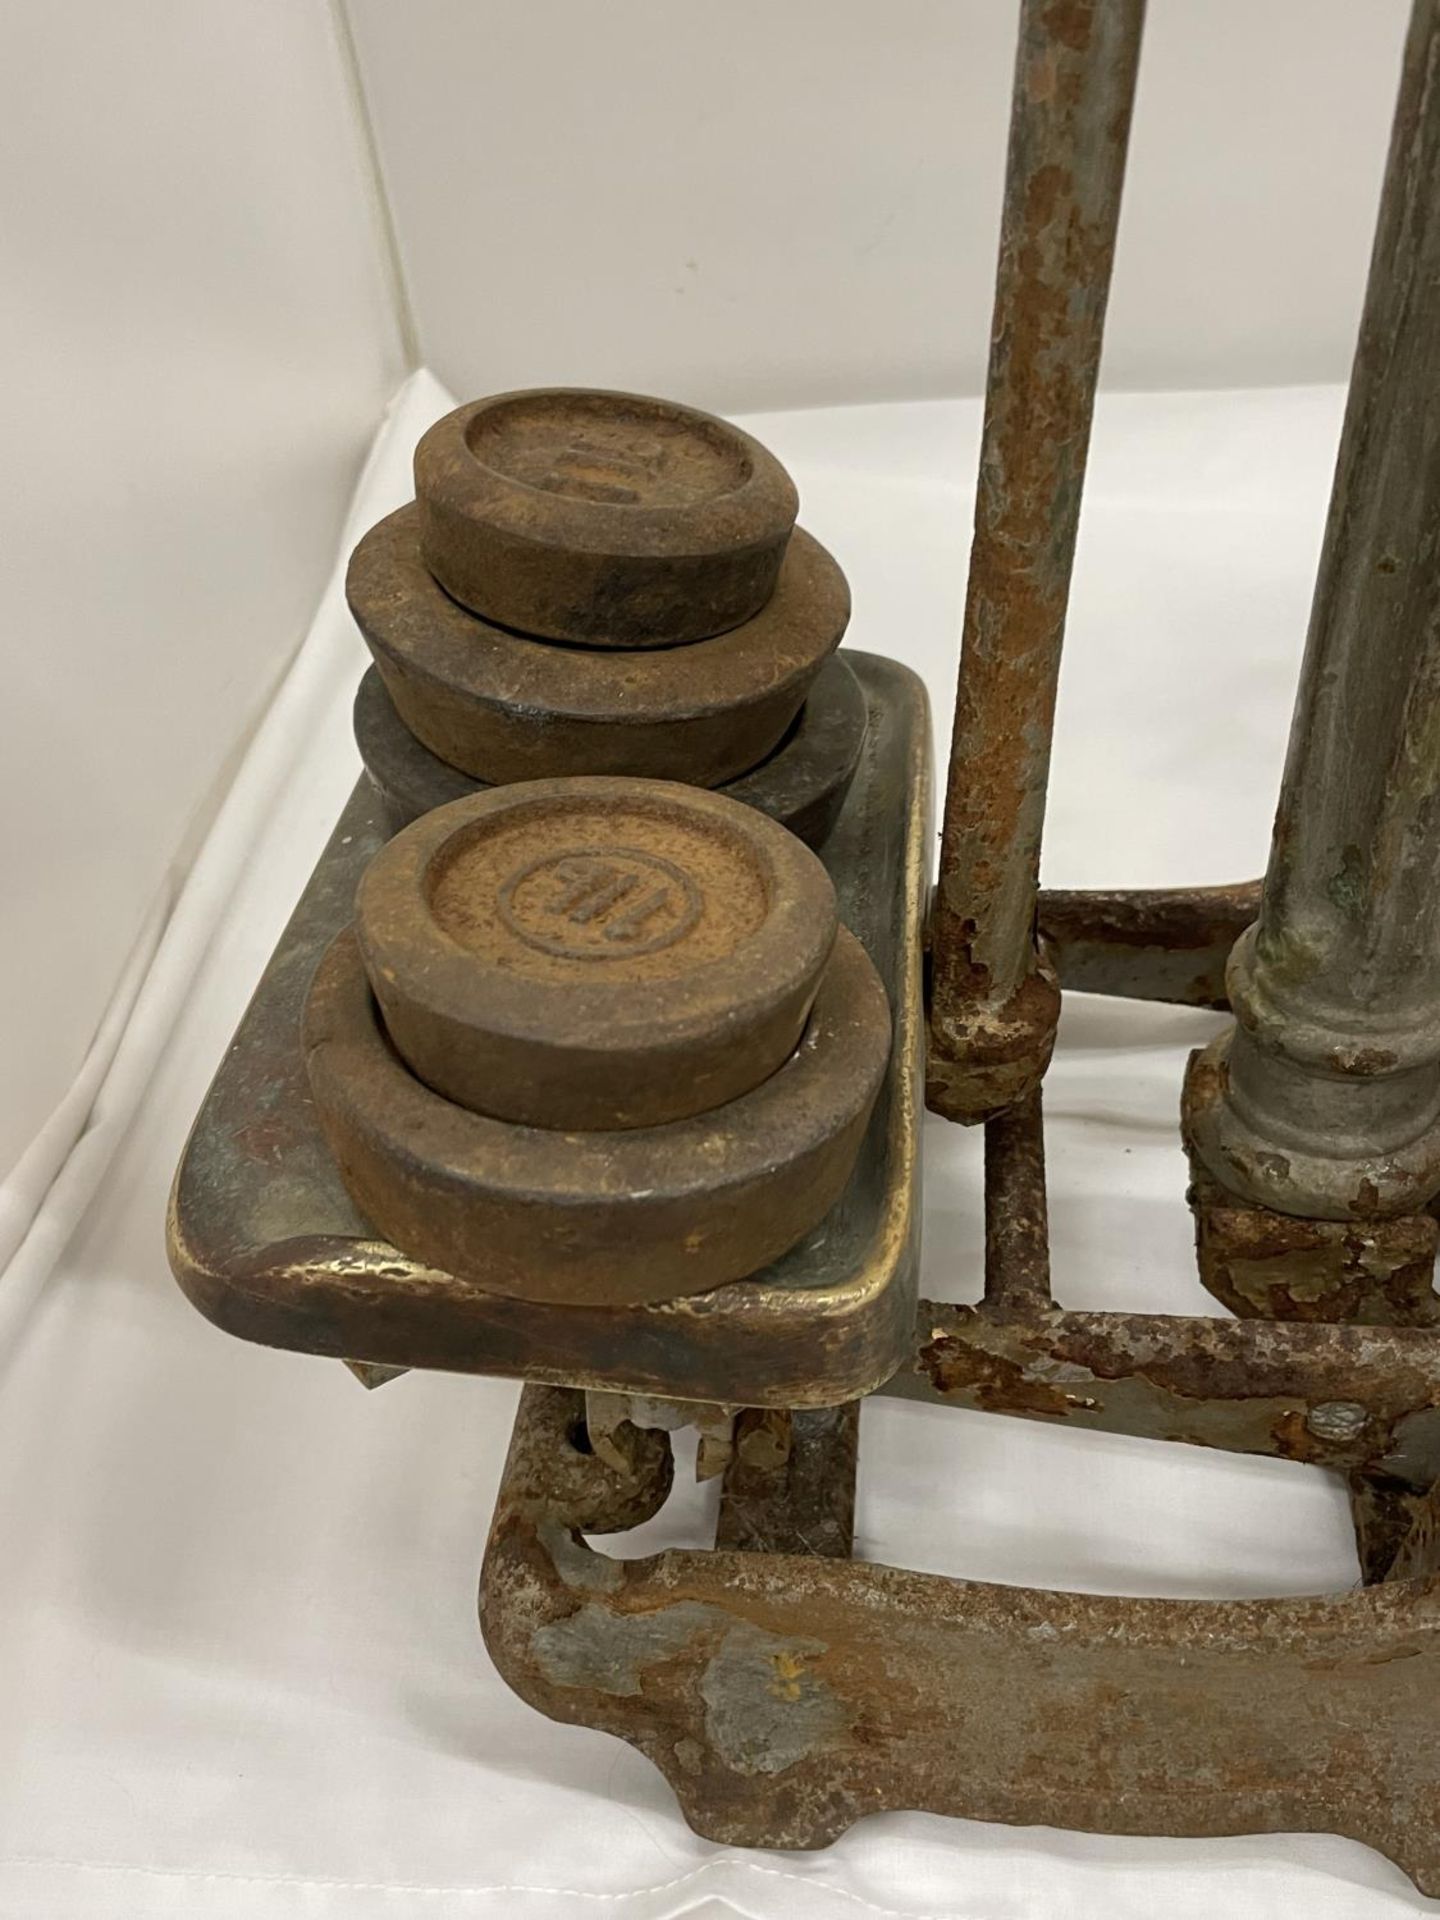 A HERBERT AND SON ANTIQUE BUTCHERS SCALES WITH CERAMIC TRAY AND VARIOUS WEIGHTS - Image 5 of 5